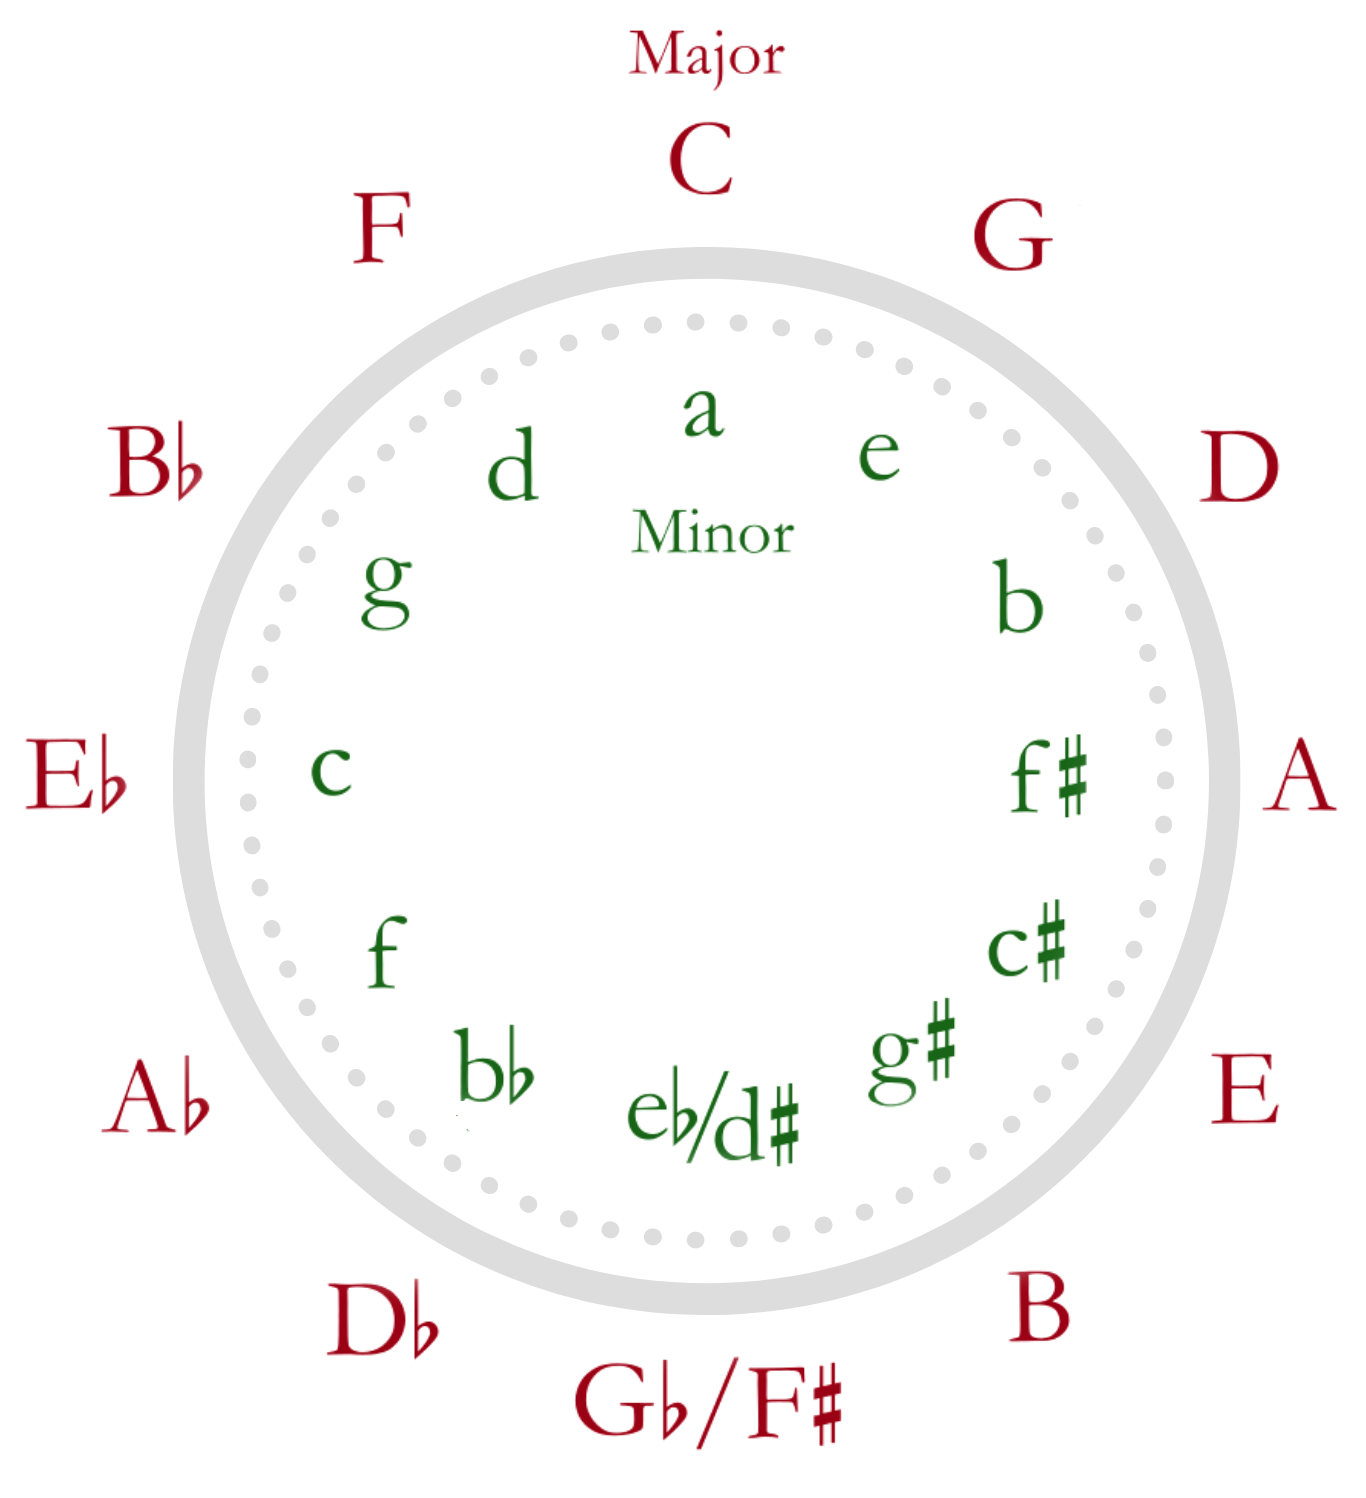 Circle of fifths showing major and minor keys